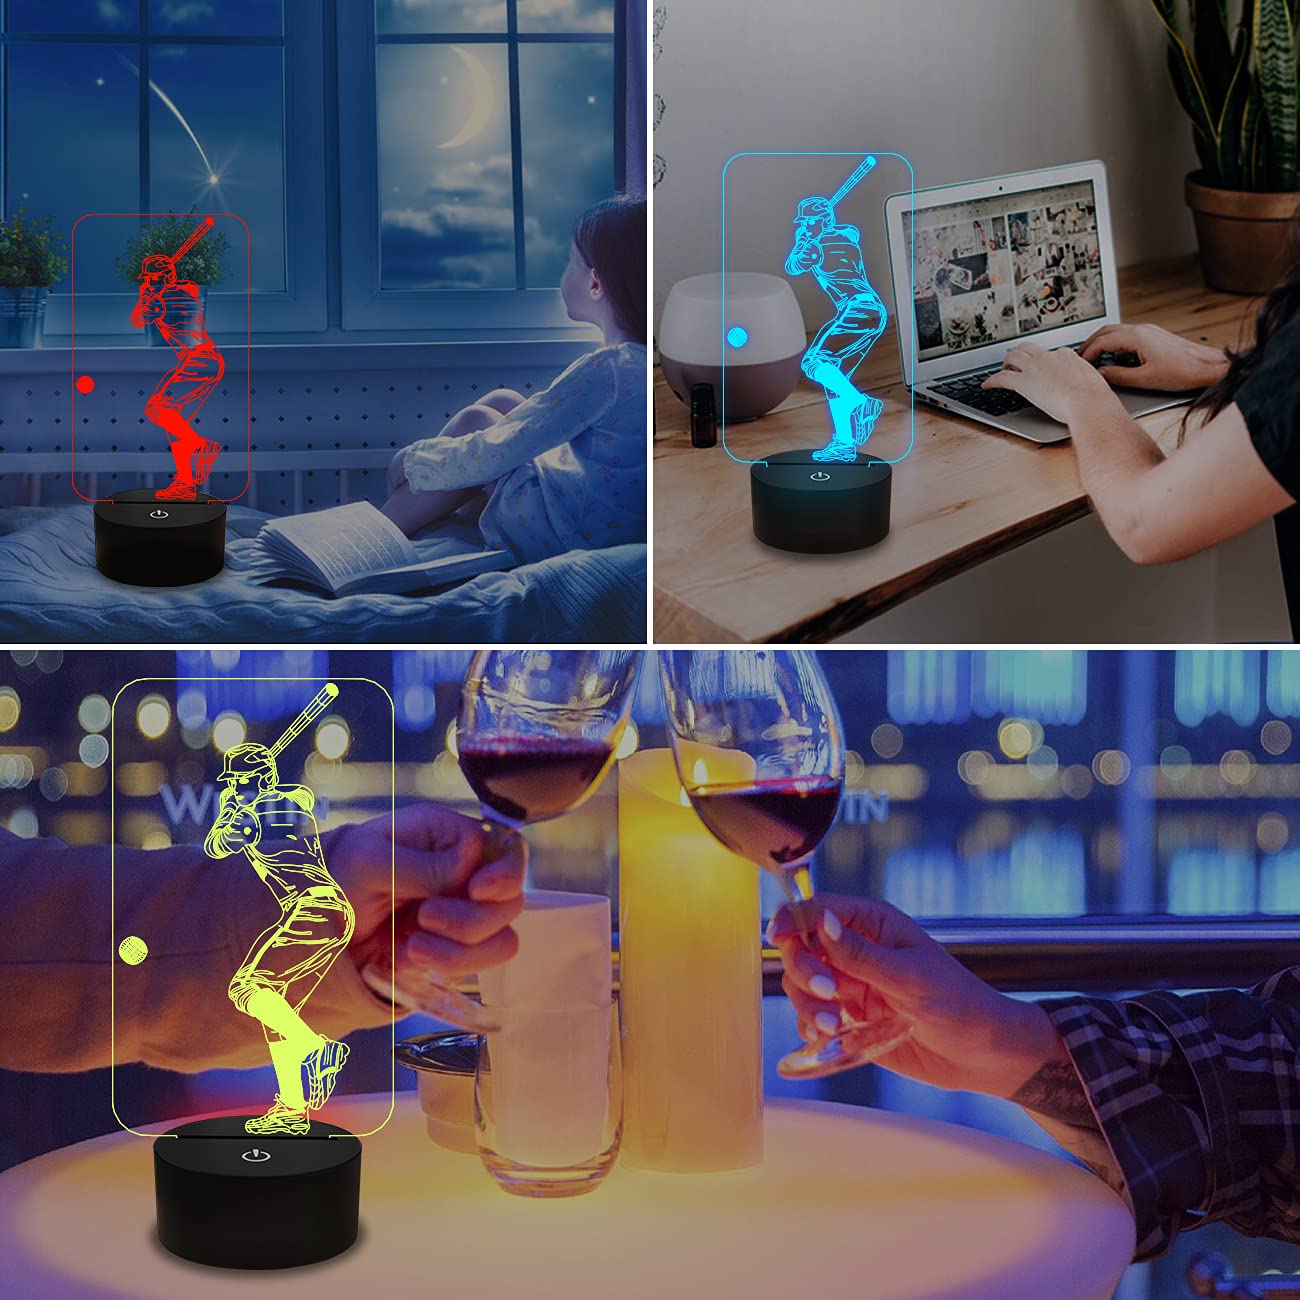 Baseball 3D Night Light, Baseball Batter Sport Gifts Bedside Lamp for Xmas Holiday Birthday Gifts for Kids Baseball Fan with Remote Control 16 Colors Changing + 4 Changing Mode + Dim Function